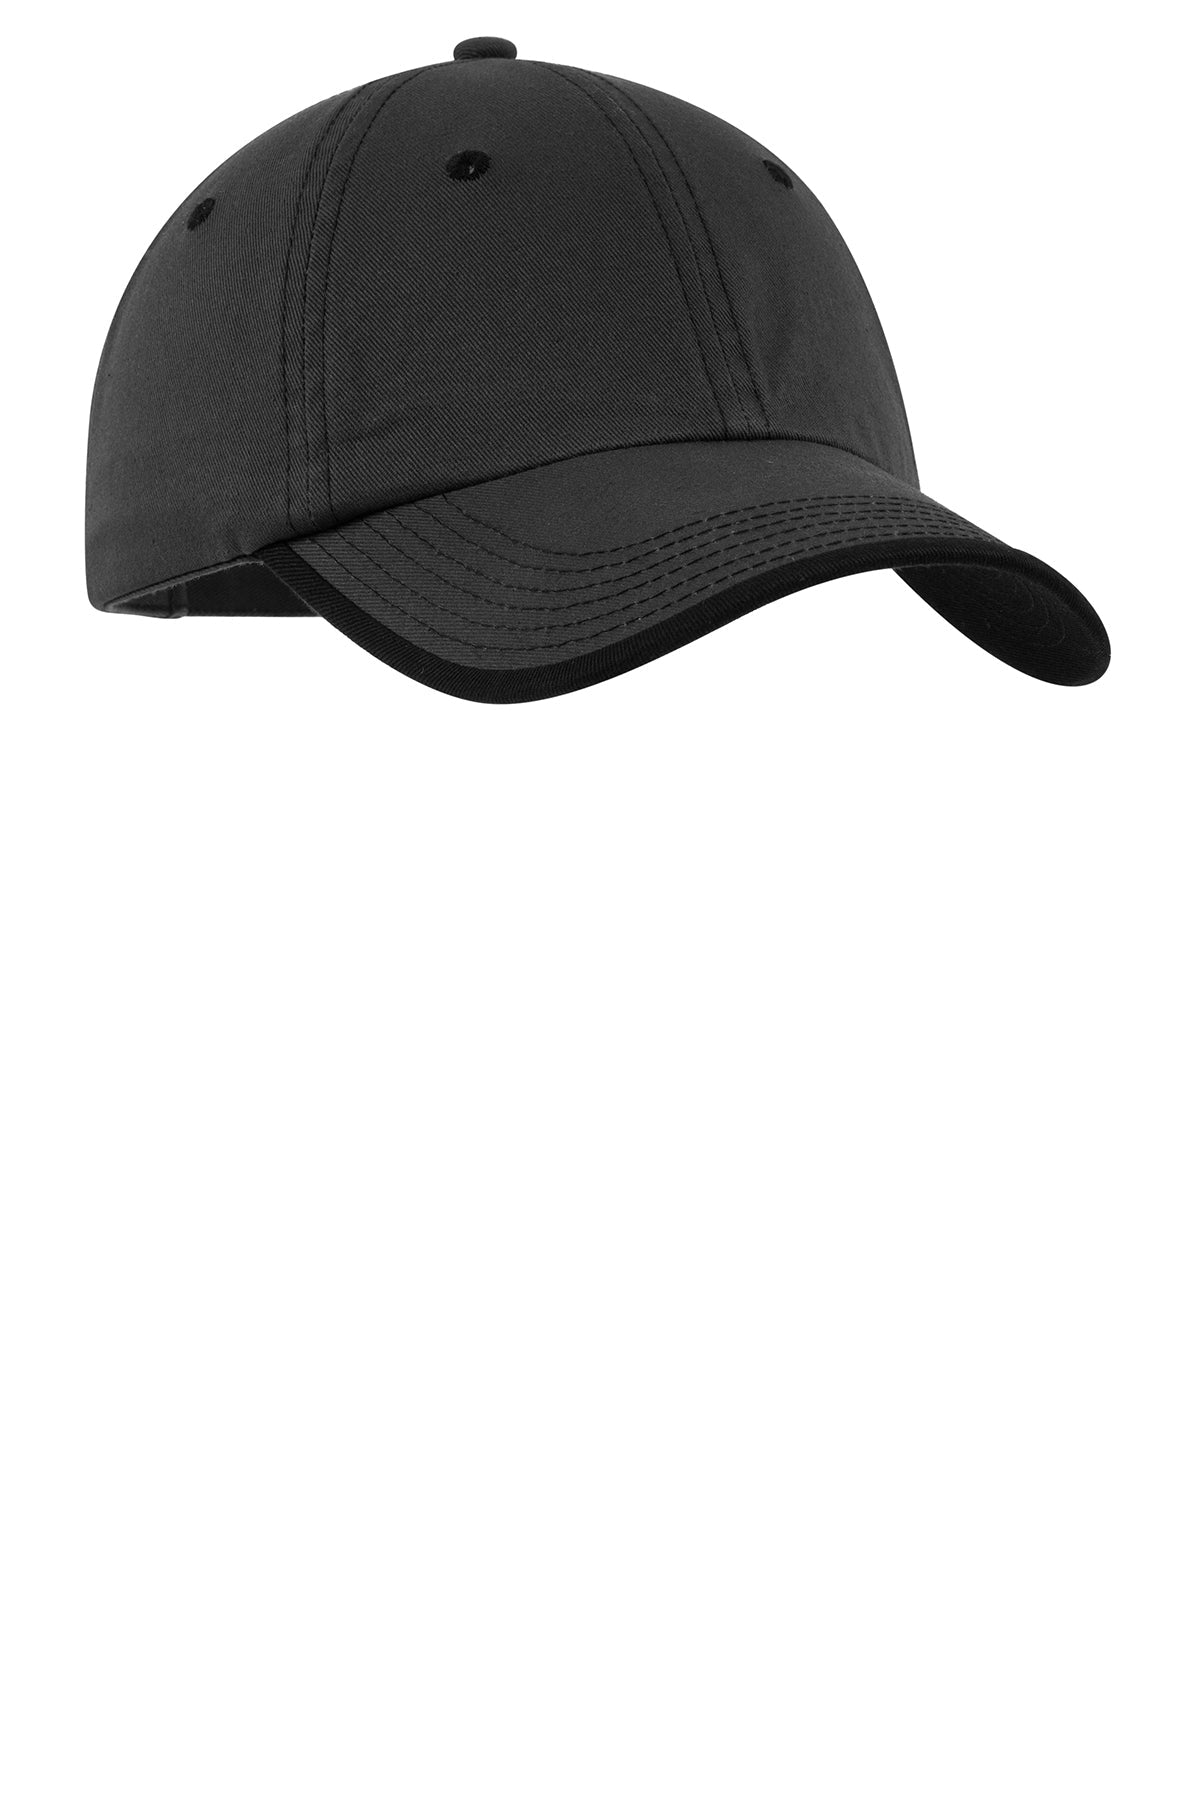 Port Authority Vintage Washed Custom Contrast Stitch Caps, Charcoal/Black